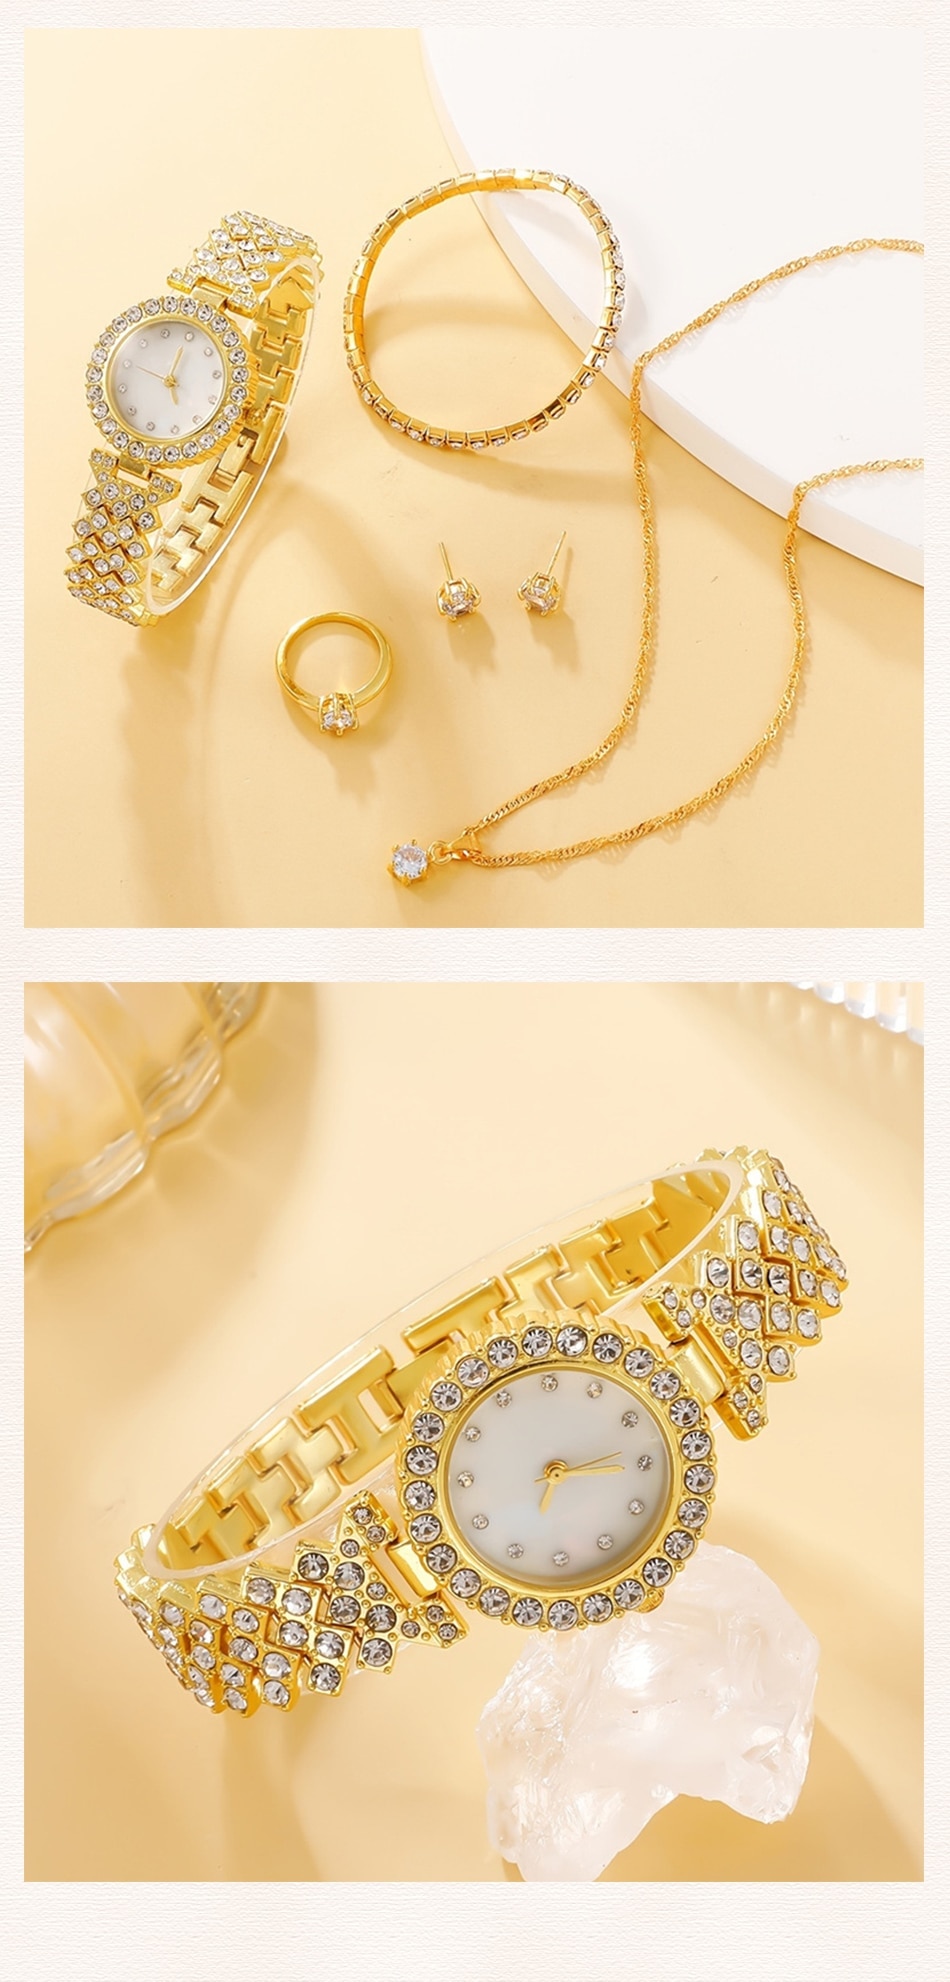 biggersourcing-_Fashion_6PCS Set Luxury Watch Women Ring Necklace Earring Rhinestone Fashion Wristwatch Casual Ladies Watches Bracelet Set Clock_Provide you to purchase, logistics, monitoring, inspection, factories and other service providers in China_First1Open